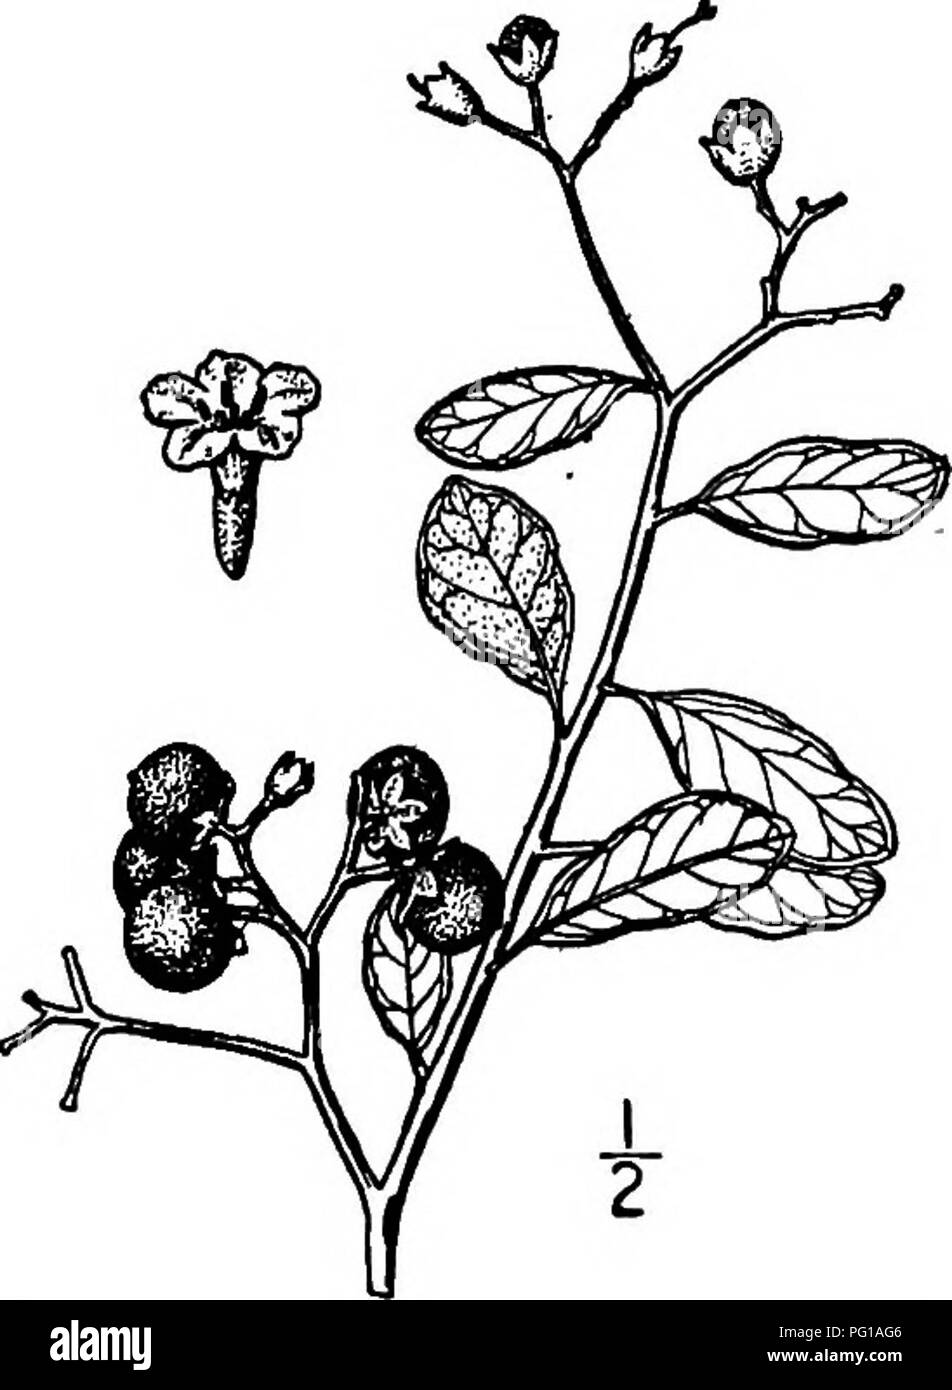 . North American trees : being descriptions and illustrations of the trees growing independently of cultivation in North America, north of Mexico and the West Indies . Trees. Rough-Leaved Strongback 821 11. THE STRONGBACKS GENUS BOURRERJA PATRICK BROWNE OURRERIA is composed of about 18 species of trees or shrubs, abun- dant in the West Indies, and peculiar to tropical America, 2 of which enter our area on the Florida Keys. They have alternate evergreen leaves. The white flowers are in terminal corymbose cymes; the calyx is bell-shaped, persistent, sometimes accres- cent, 2- to 5-lobed; the cor Stock Photo